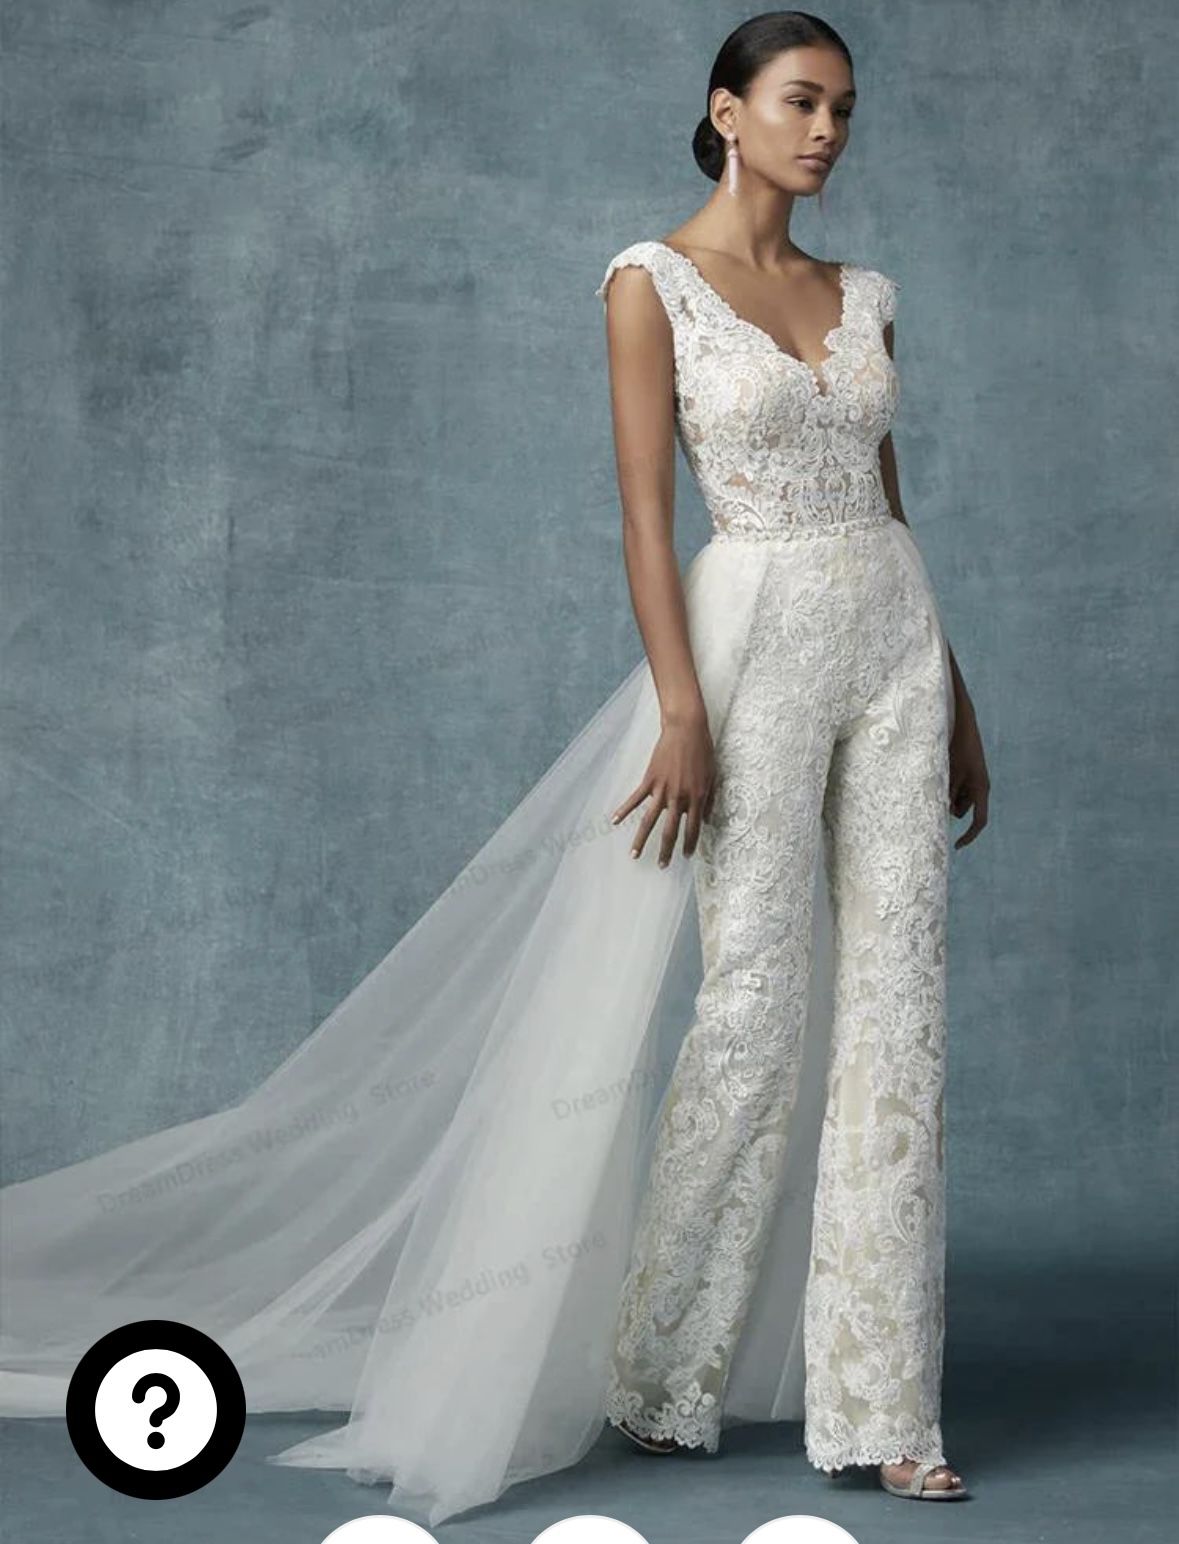 Wedding jumpsuit with train